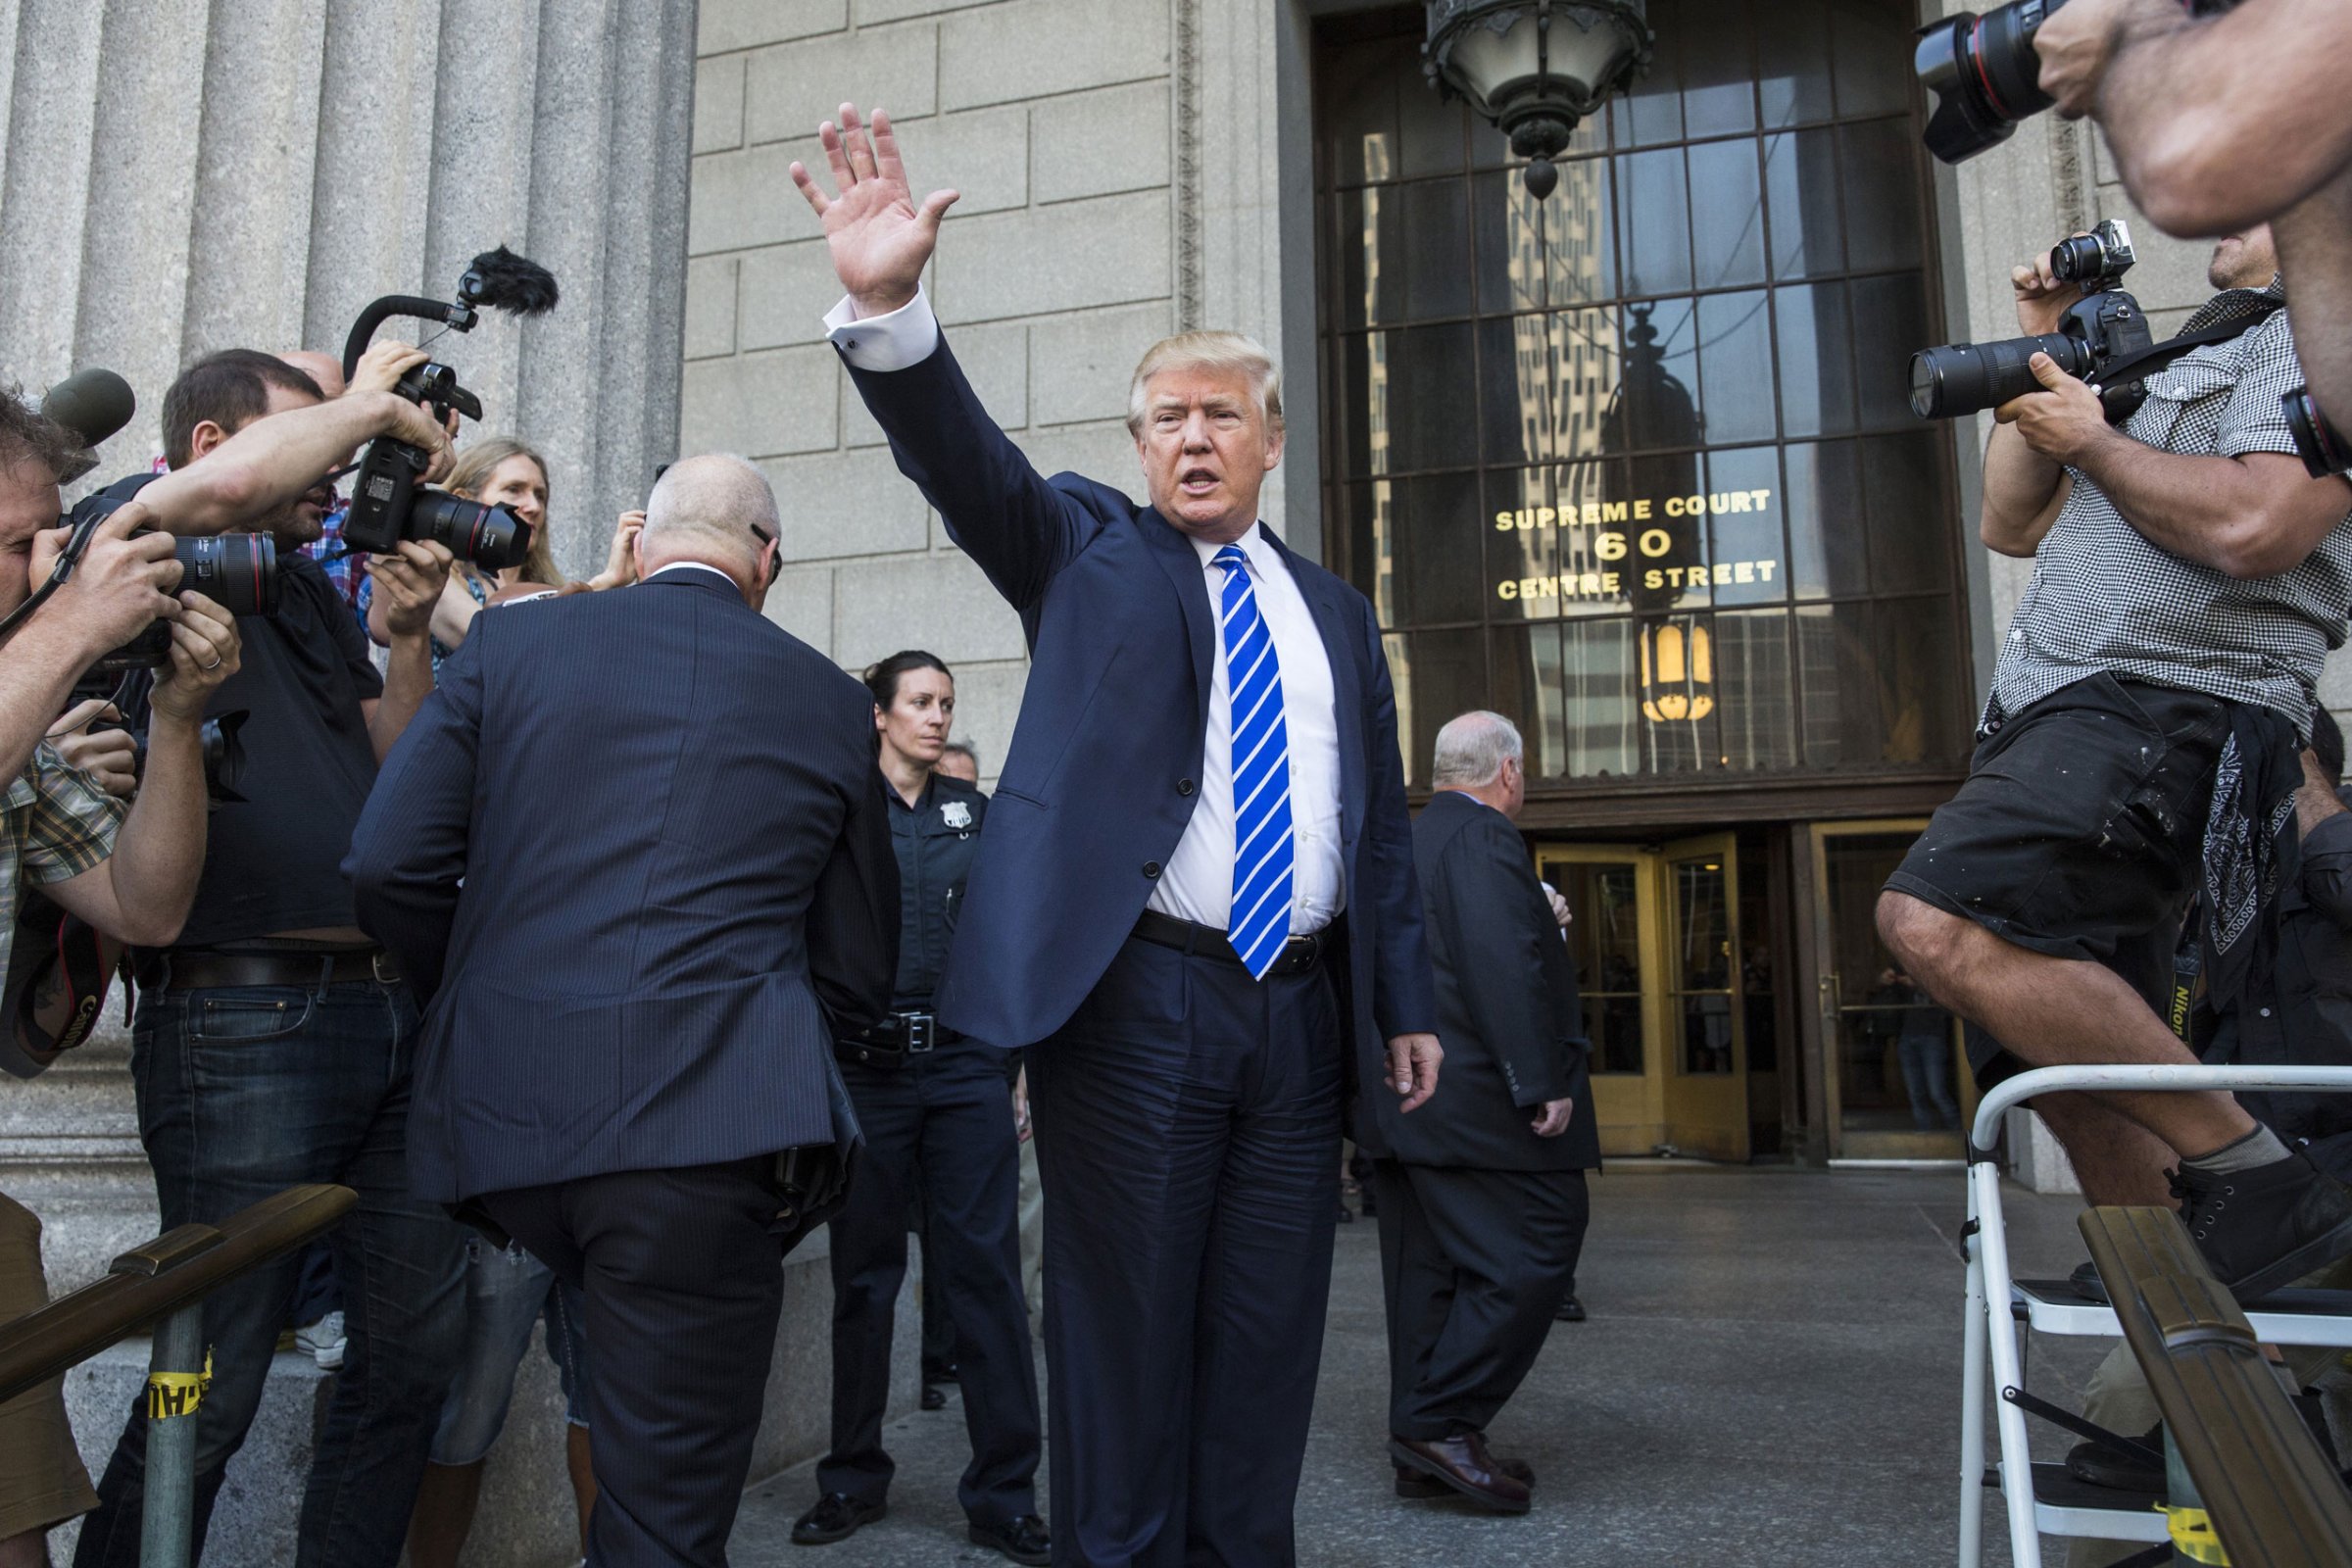 NEW YORK, NY - AUGUST 17: Republican Presidential hopeful Donald Trump waves as he arrives at U.S. Federal Court to report for jury duty on August 17, 2015 in New York City. Trump spent the last few days on the campaign trail at the Iowa state fair before returning to New York to perform the civic duty. (Photo by Andrew Burton/Getty Images)